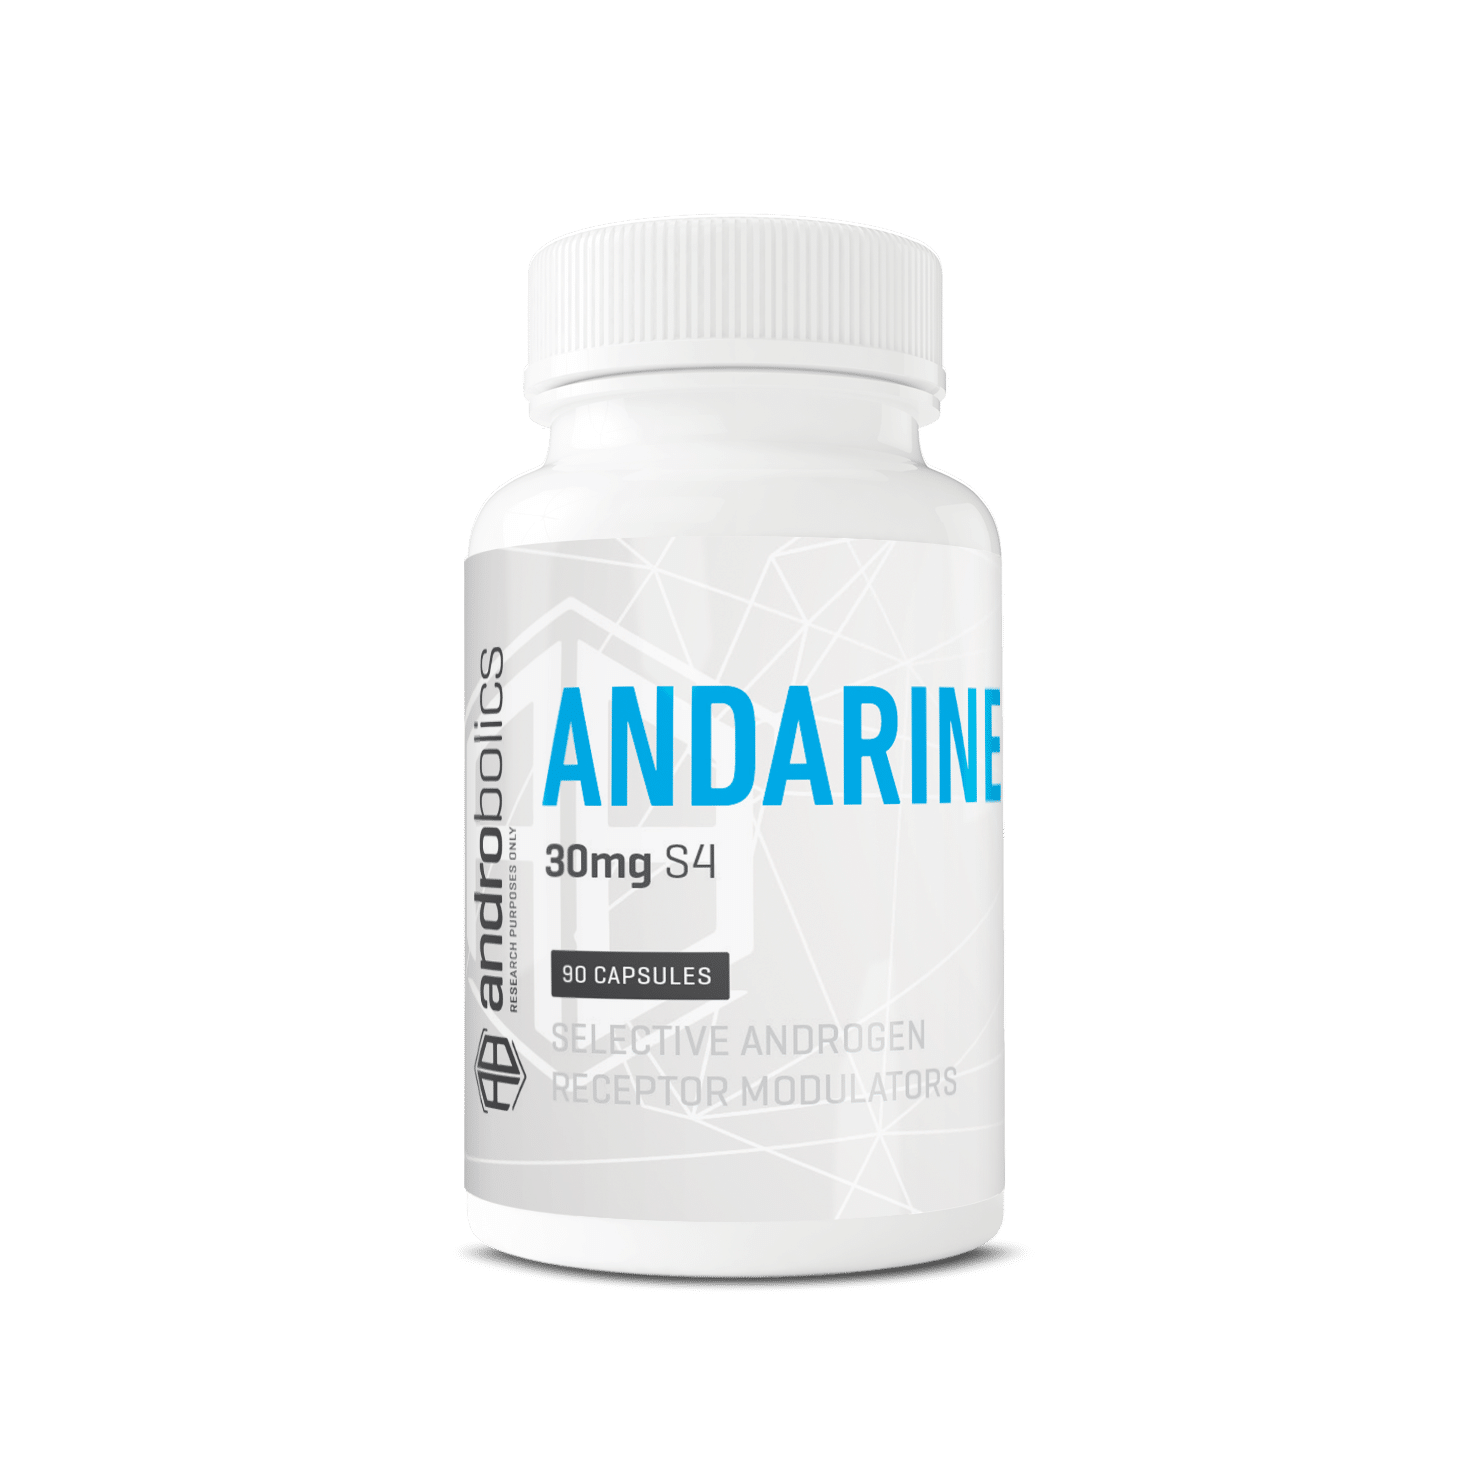 Androbolics Andarine S4 - 90 Capsules of 30mg for Improved Muscle Mass and Strength